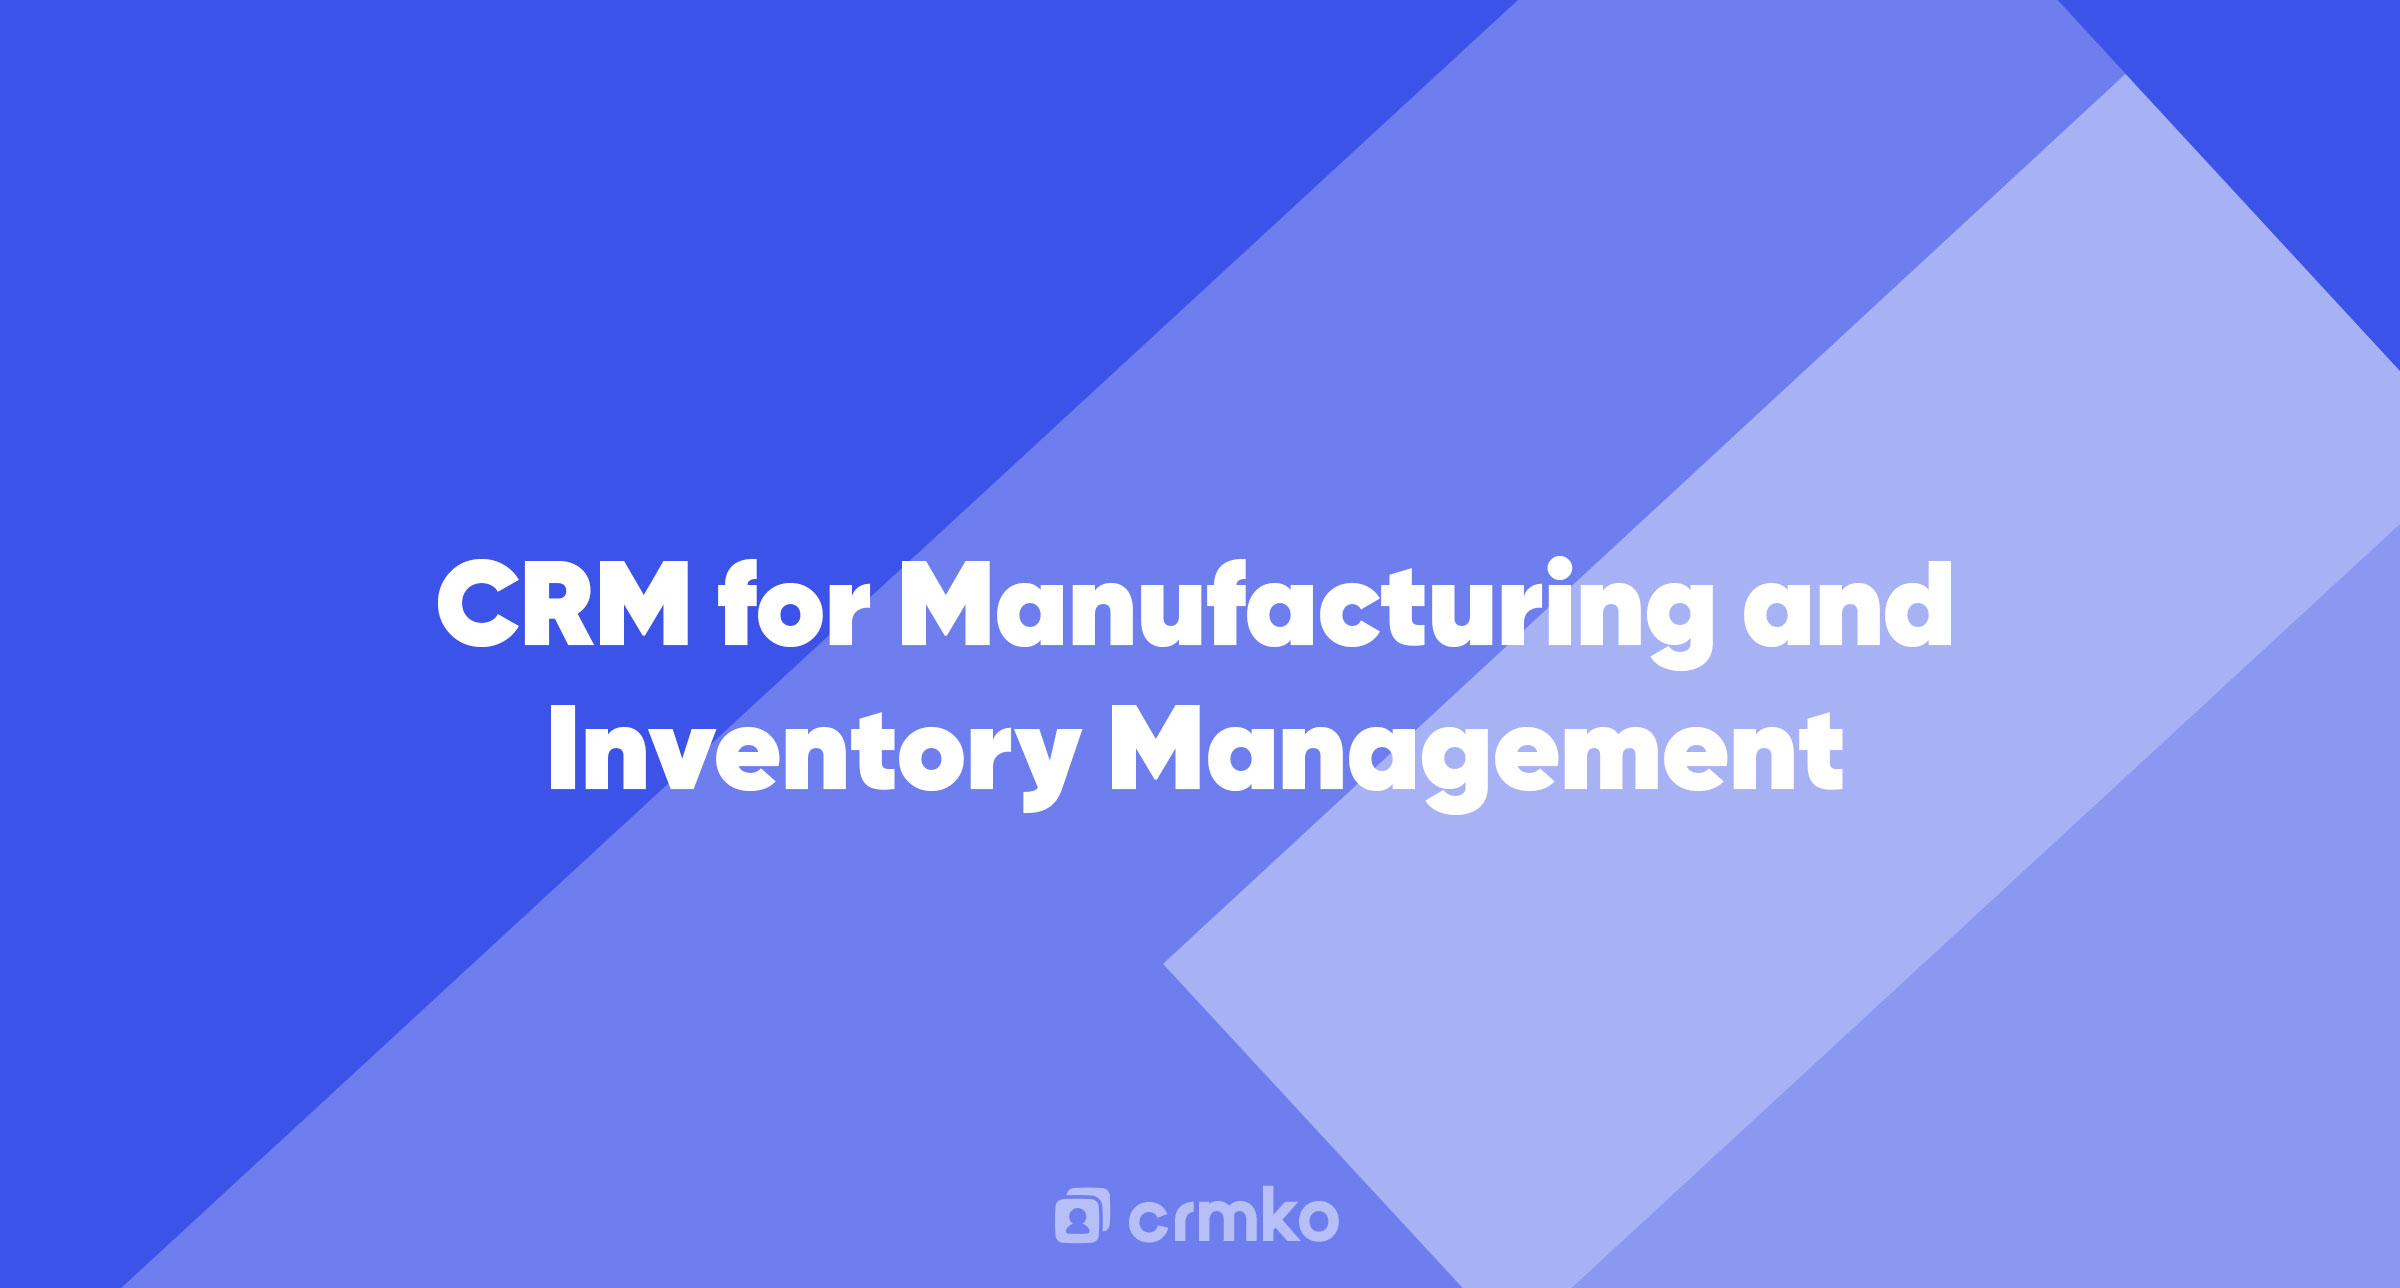 Article | CRM for Manufacturing and Inventory Management